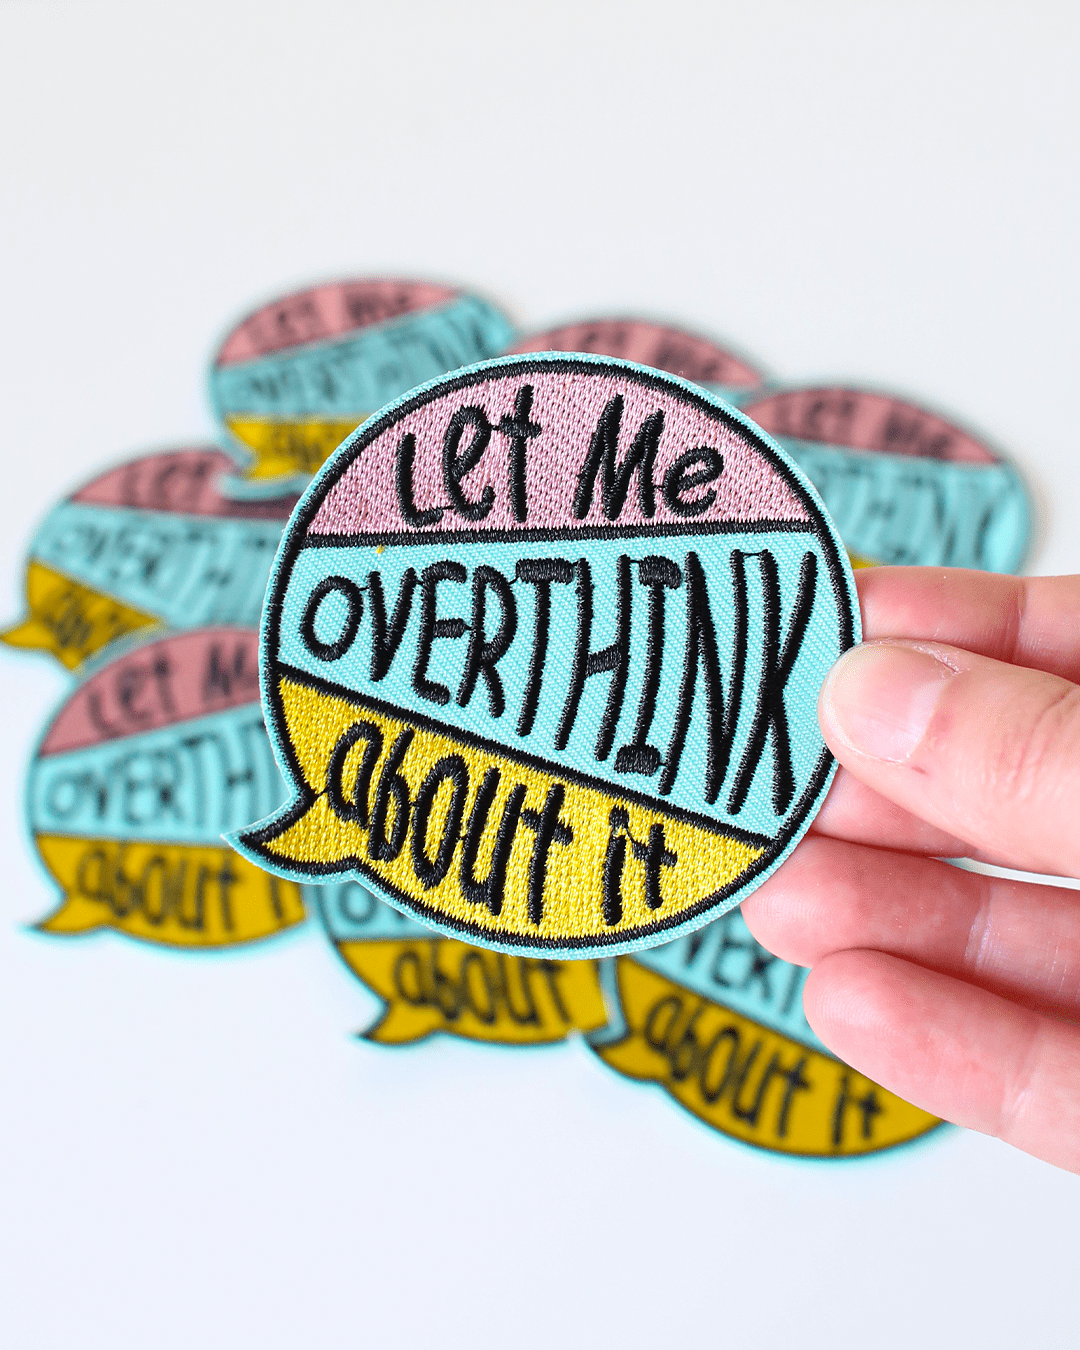 Let Me Overthink This Clothes Patch - Embroidered Iron On Clothes Patch - Let Me Overthink This Patch